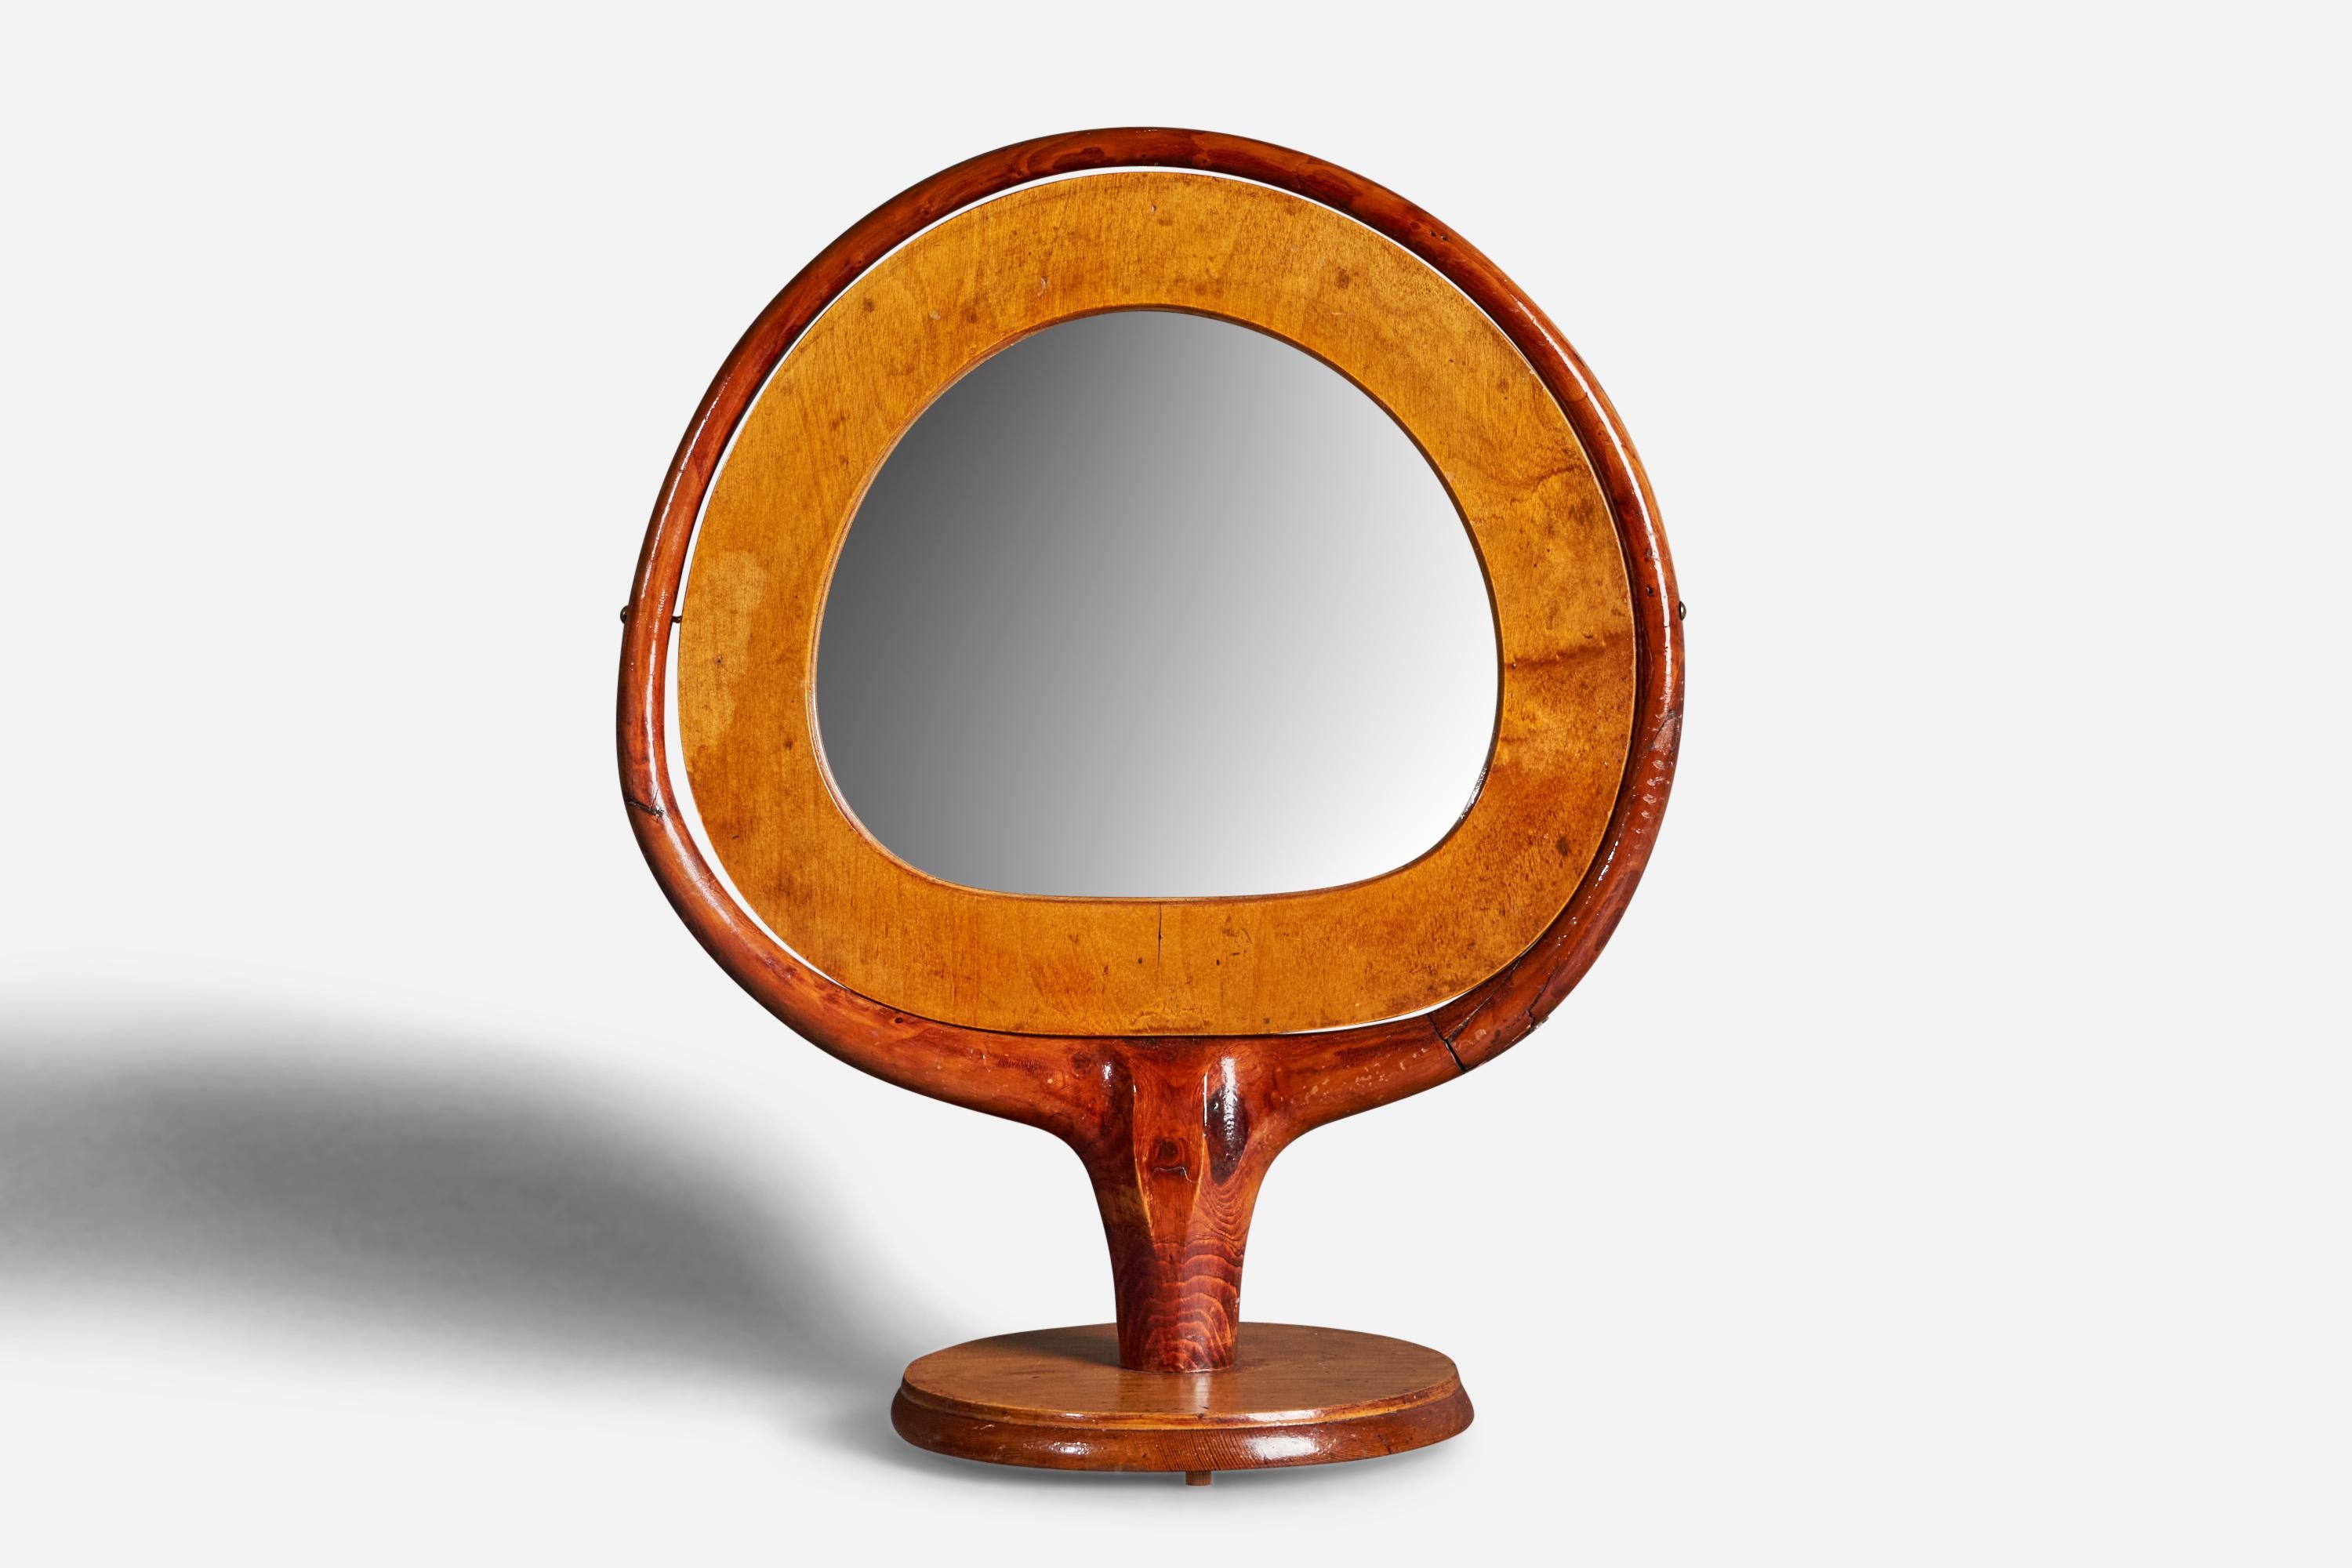 A stained birch table mirror, designed and produced in Finland, 1930s.